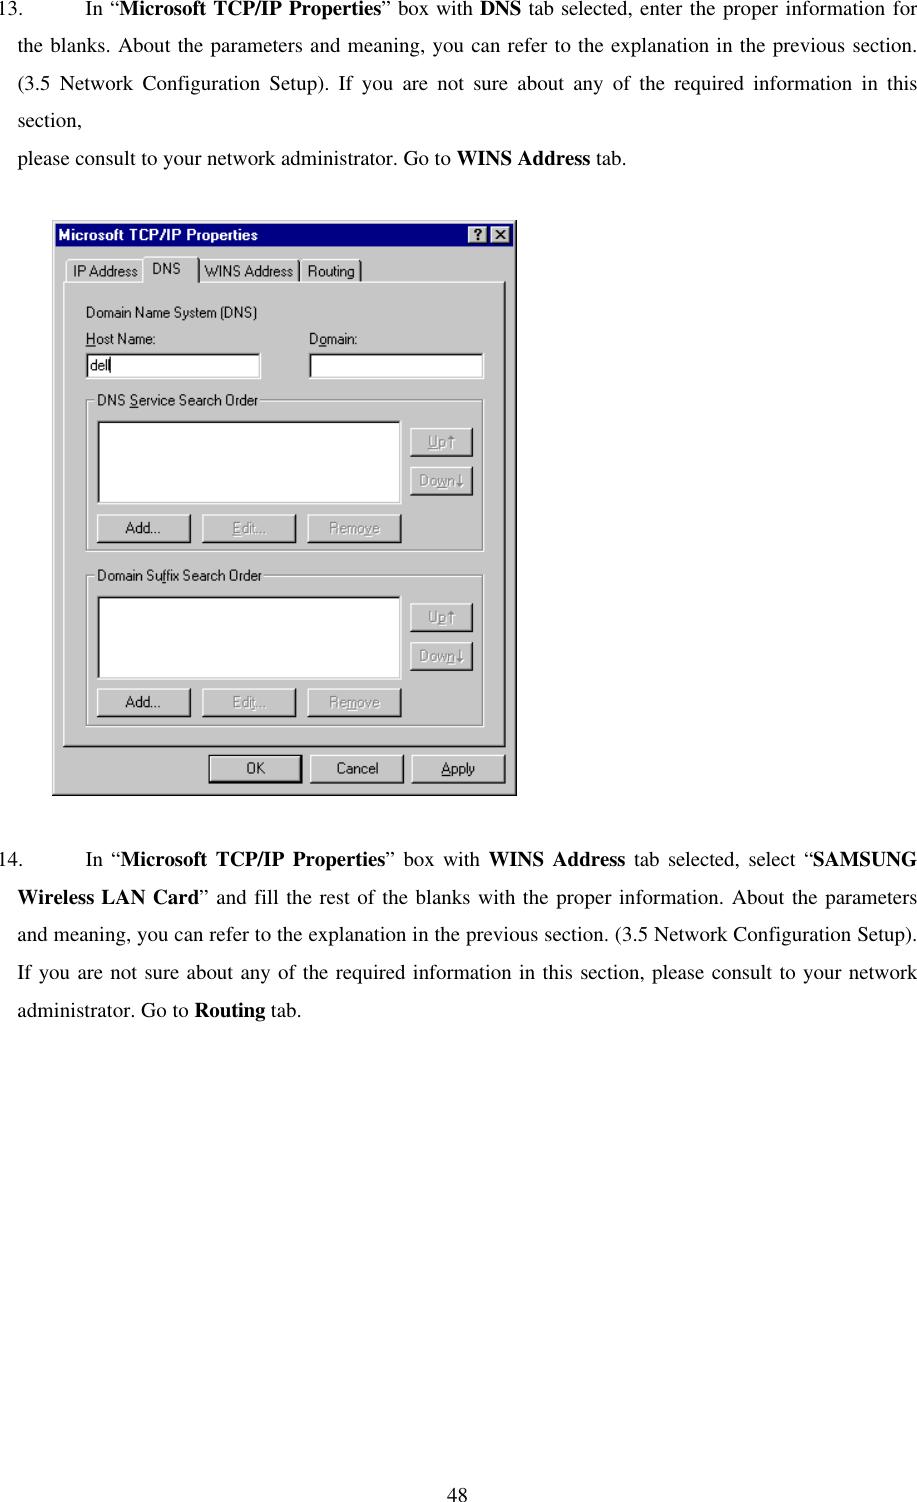 4813. In “Microsoft TCP/IP Properties” box with DNS tab selected, enter the proper information forthe blanks. About the parameters and meaning, you can refer to the explanation in the previous section.(3.5 Network Configuration Setup). If you are not sure about any of the required information in thissection,please consult to your network administrator. Go to WINS Address tab.          14. In “Microsoft TCP/IP Properties” box with WINS Address tab selected, select “SAMSUNGWireless LAN Card” and fill the rest of the blanks with the proper information. About the parametersand meaning, you can refer to the explanation in the previous section. (3.5 Network Configuration Setup).If you are not sure about any of the required information in this section, please consult to your networkadministrator. Go to Routing tab.